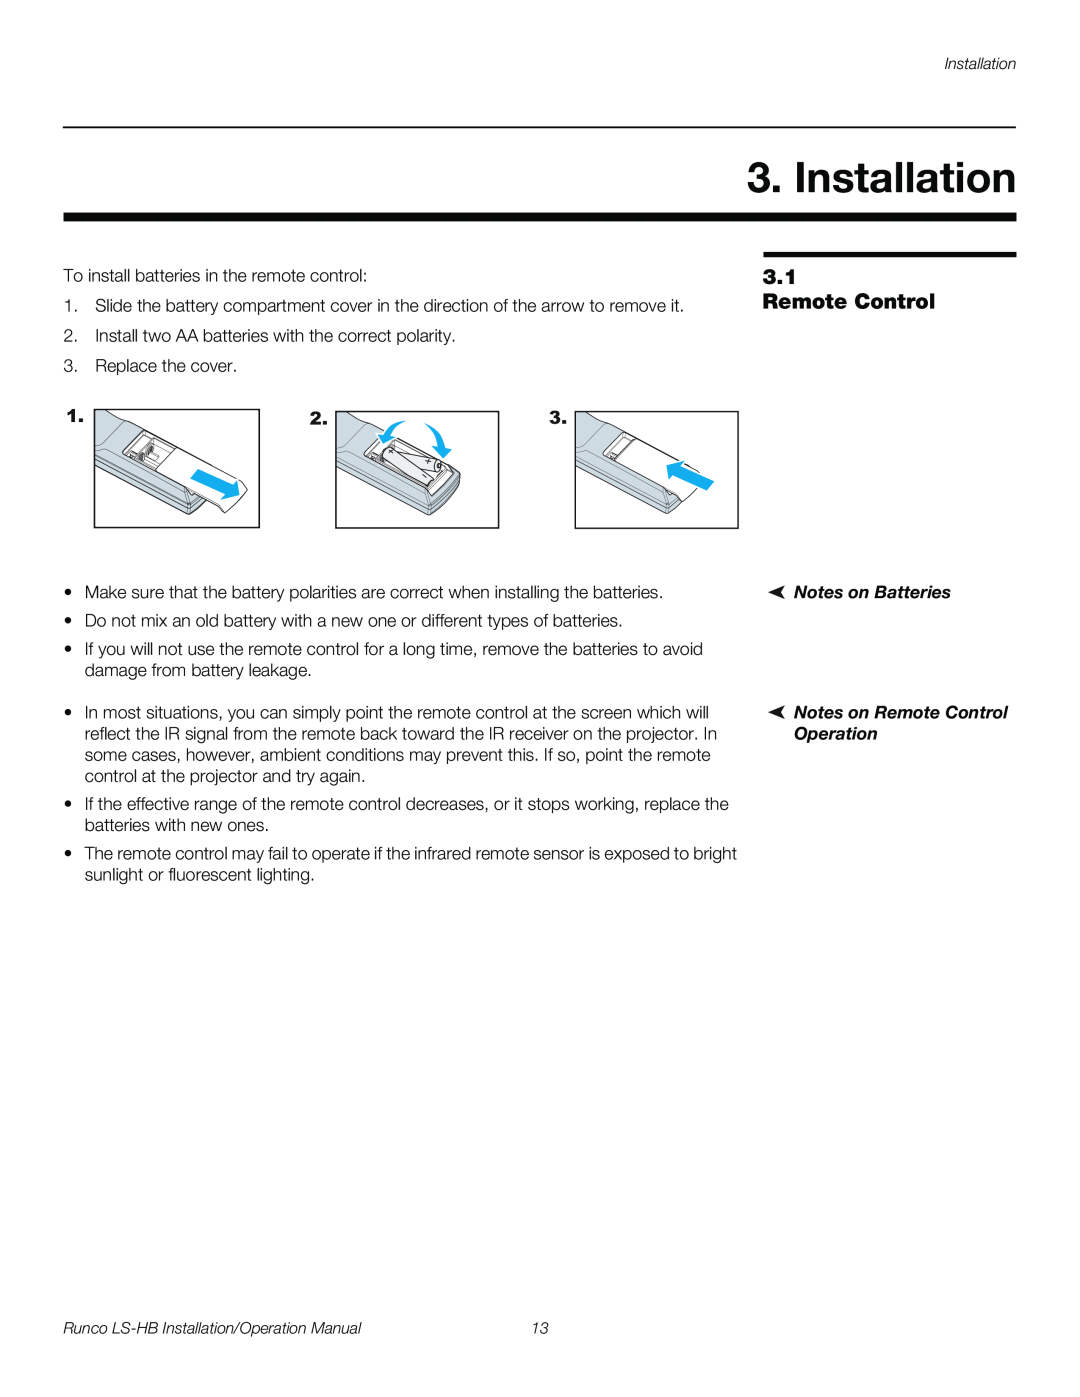 Runco LS-HB operation manual Installation, Notes on Batteries, Notes on Remote Control, Operation 